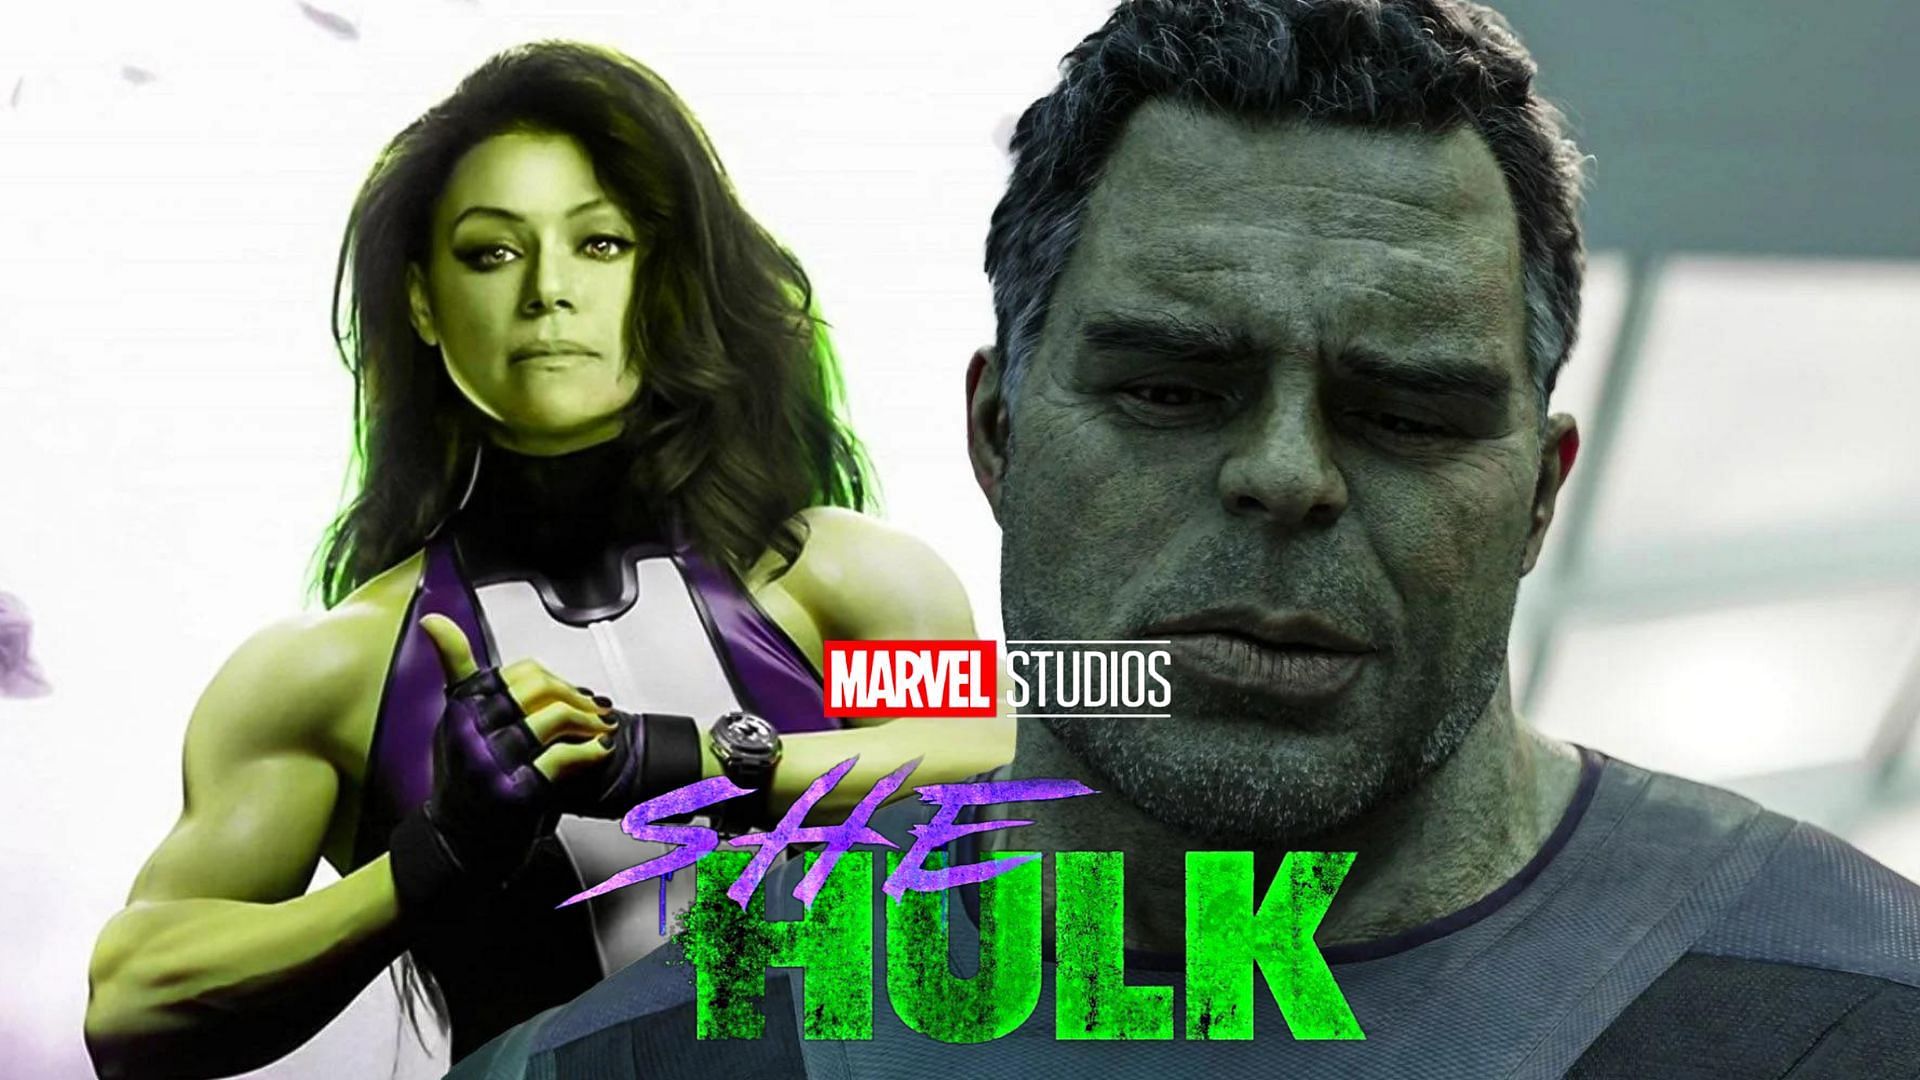 New She-Hulk series officially announced by Marvel